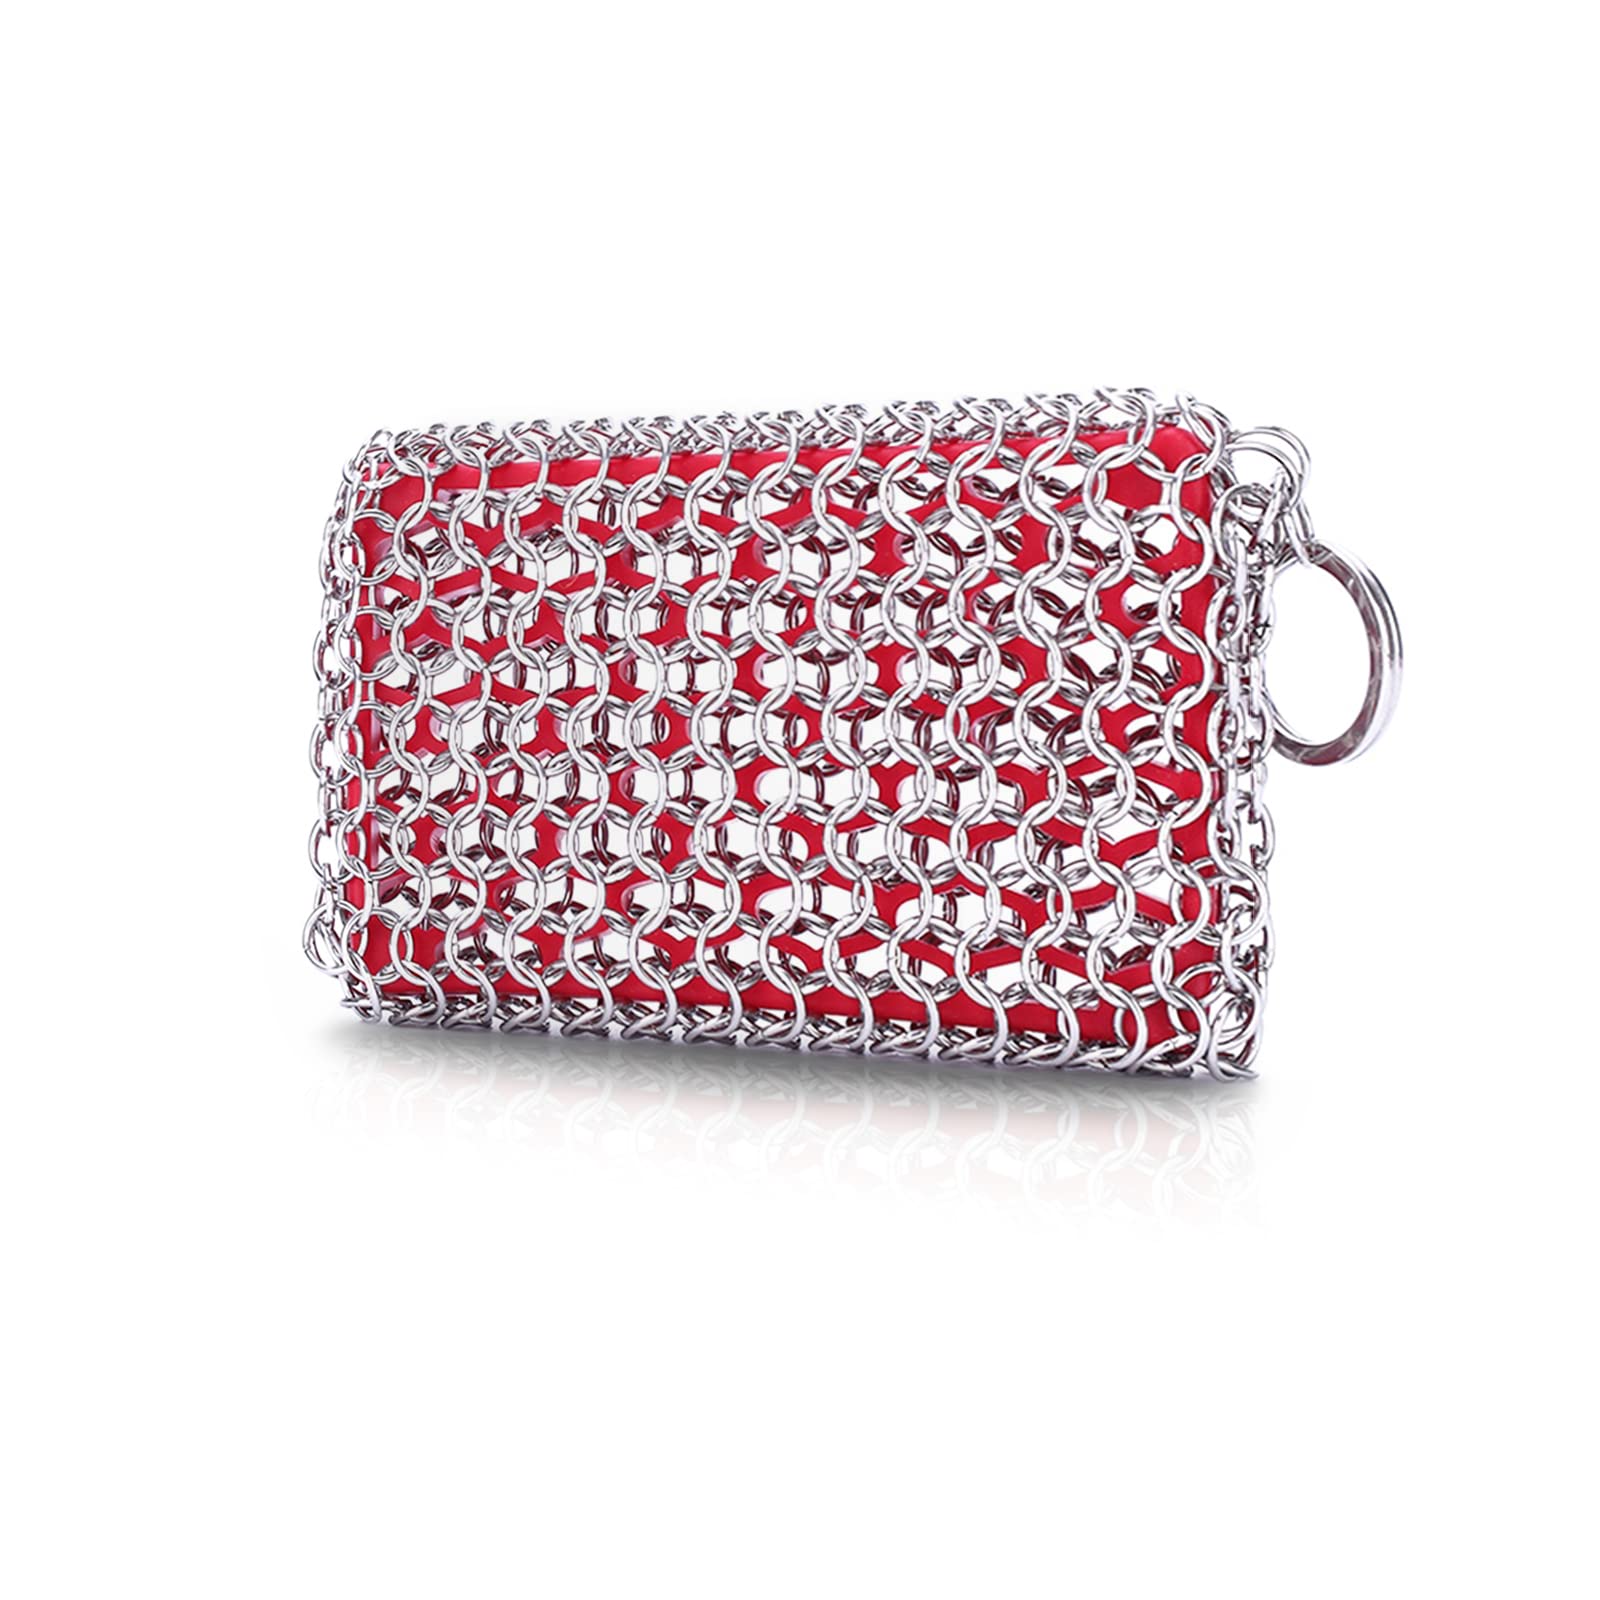 Cast Iron Chainmail Scrubber 316L Stainless Steel Rectangle Chain